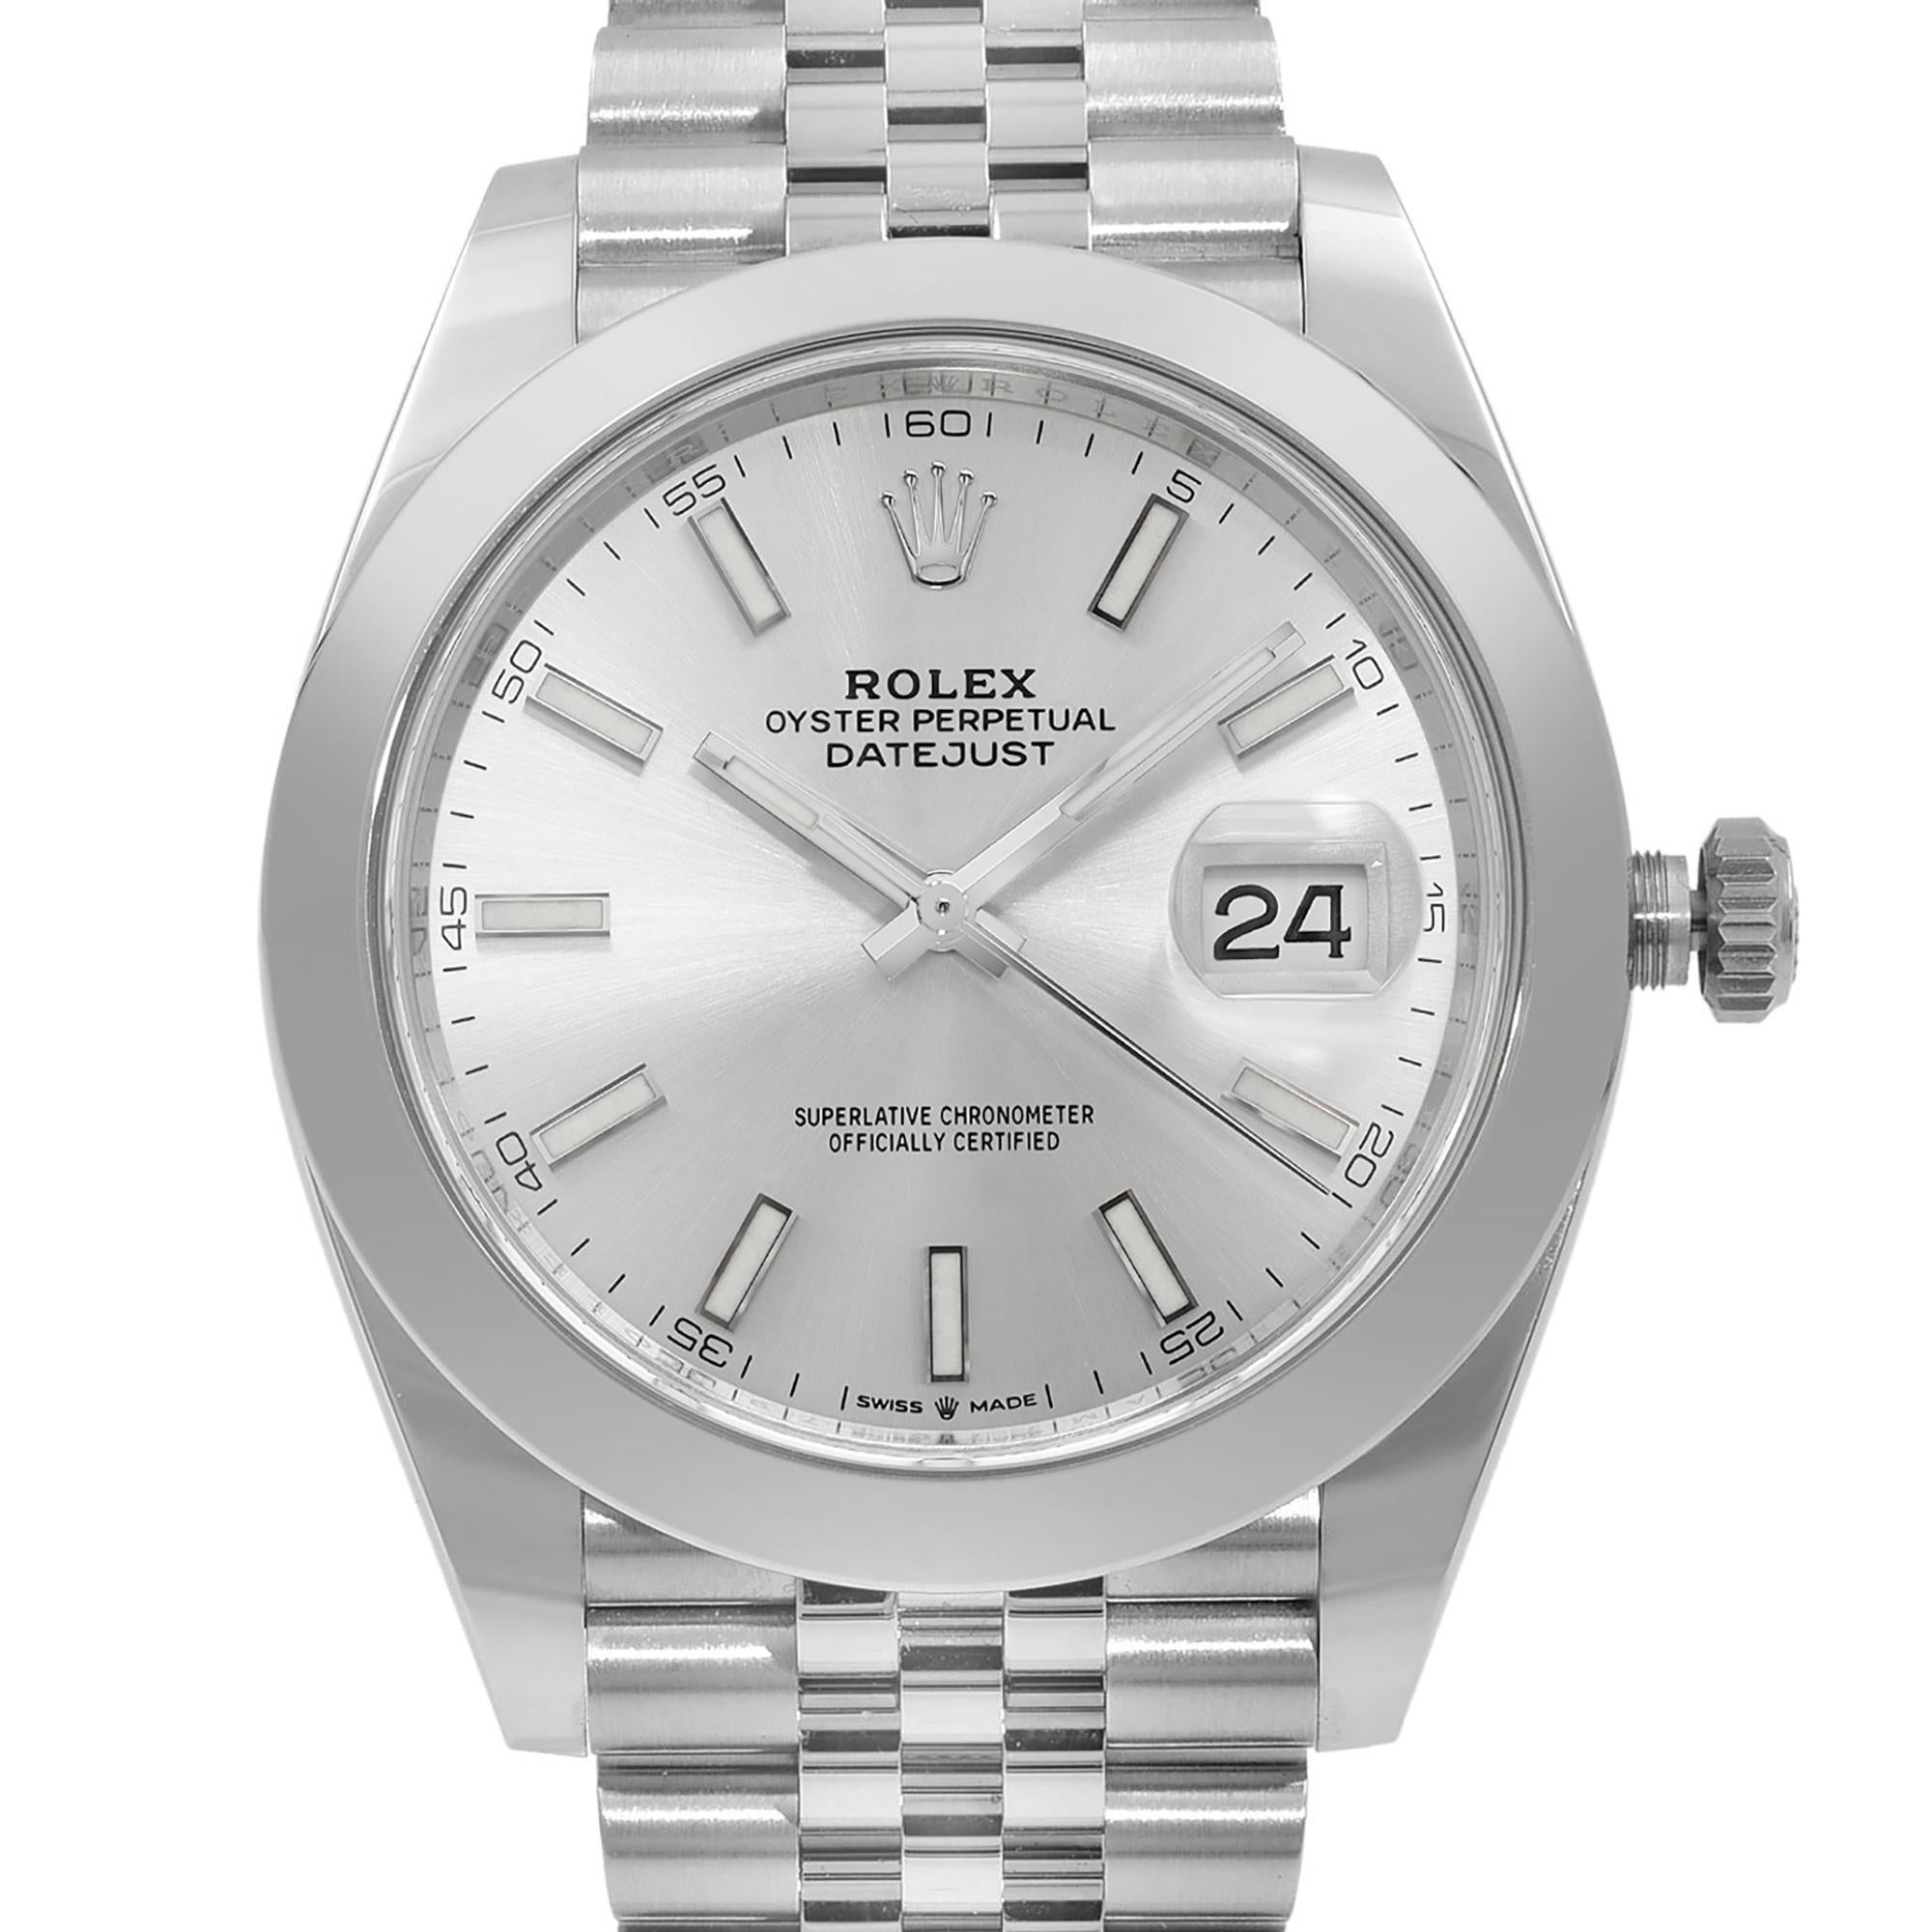 New watch.2022-2023 card.  Comes with an Original Box and Papers. Covered by a 5-year Chronostore Warranty.

General Information

Brand: Rolex
Model Number: 126300
Model: Rolex Datejust 126300
Type: Wristwatch
Department: Men
Country/Region of